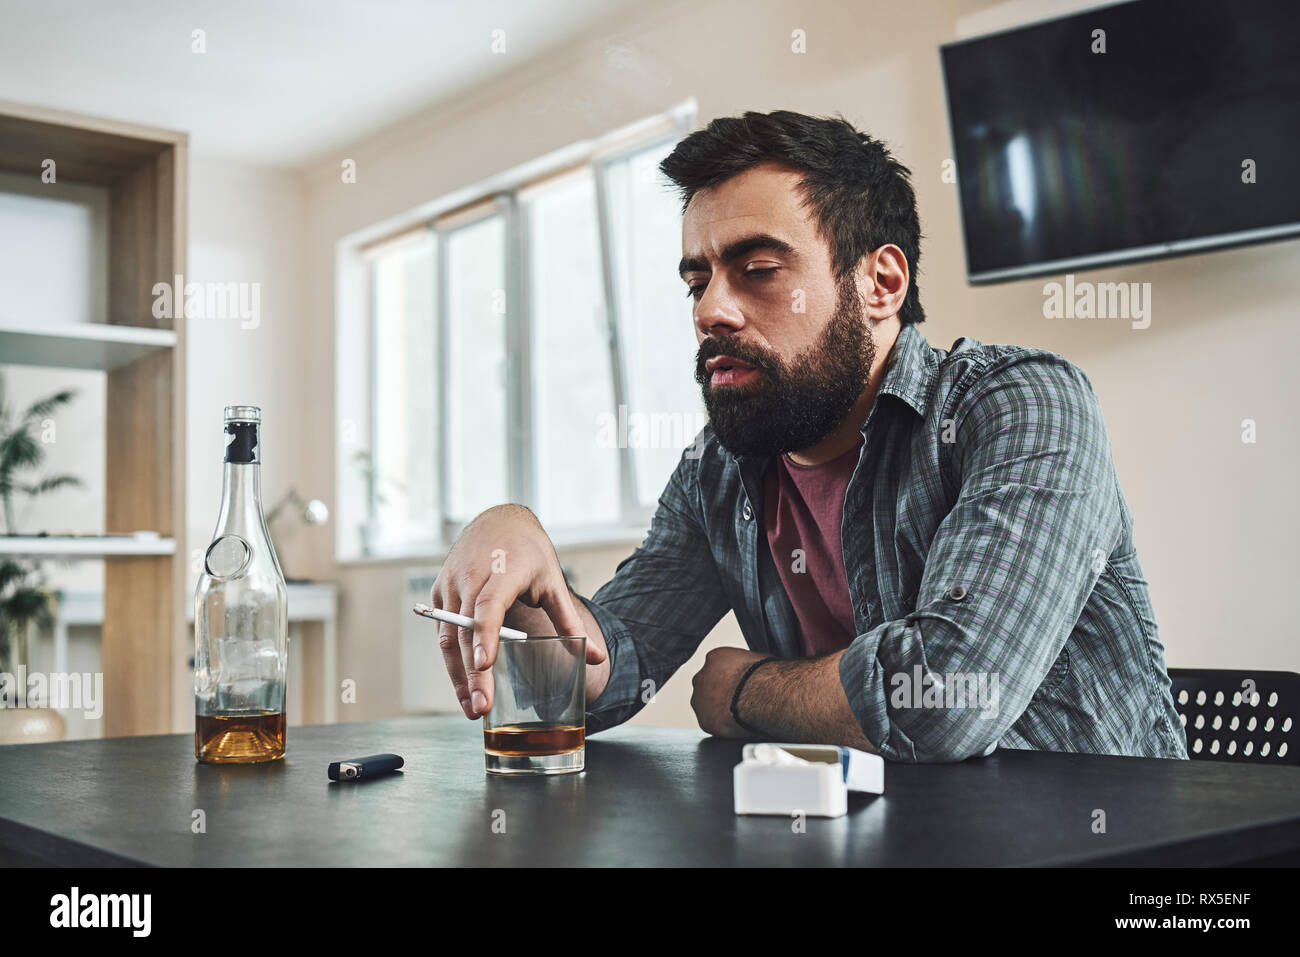 Dark-haired, sad and wasted alcoholic man sitting at the table, in the kitchen, drinking whiskey, holding glass, completely drunk, looking depressed,  Stock Photo